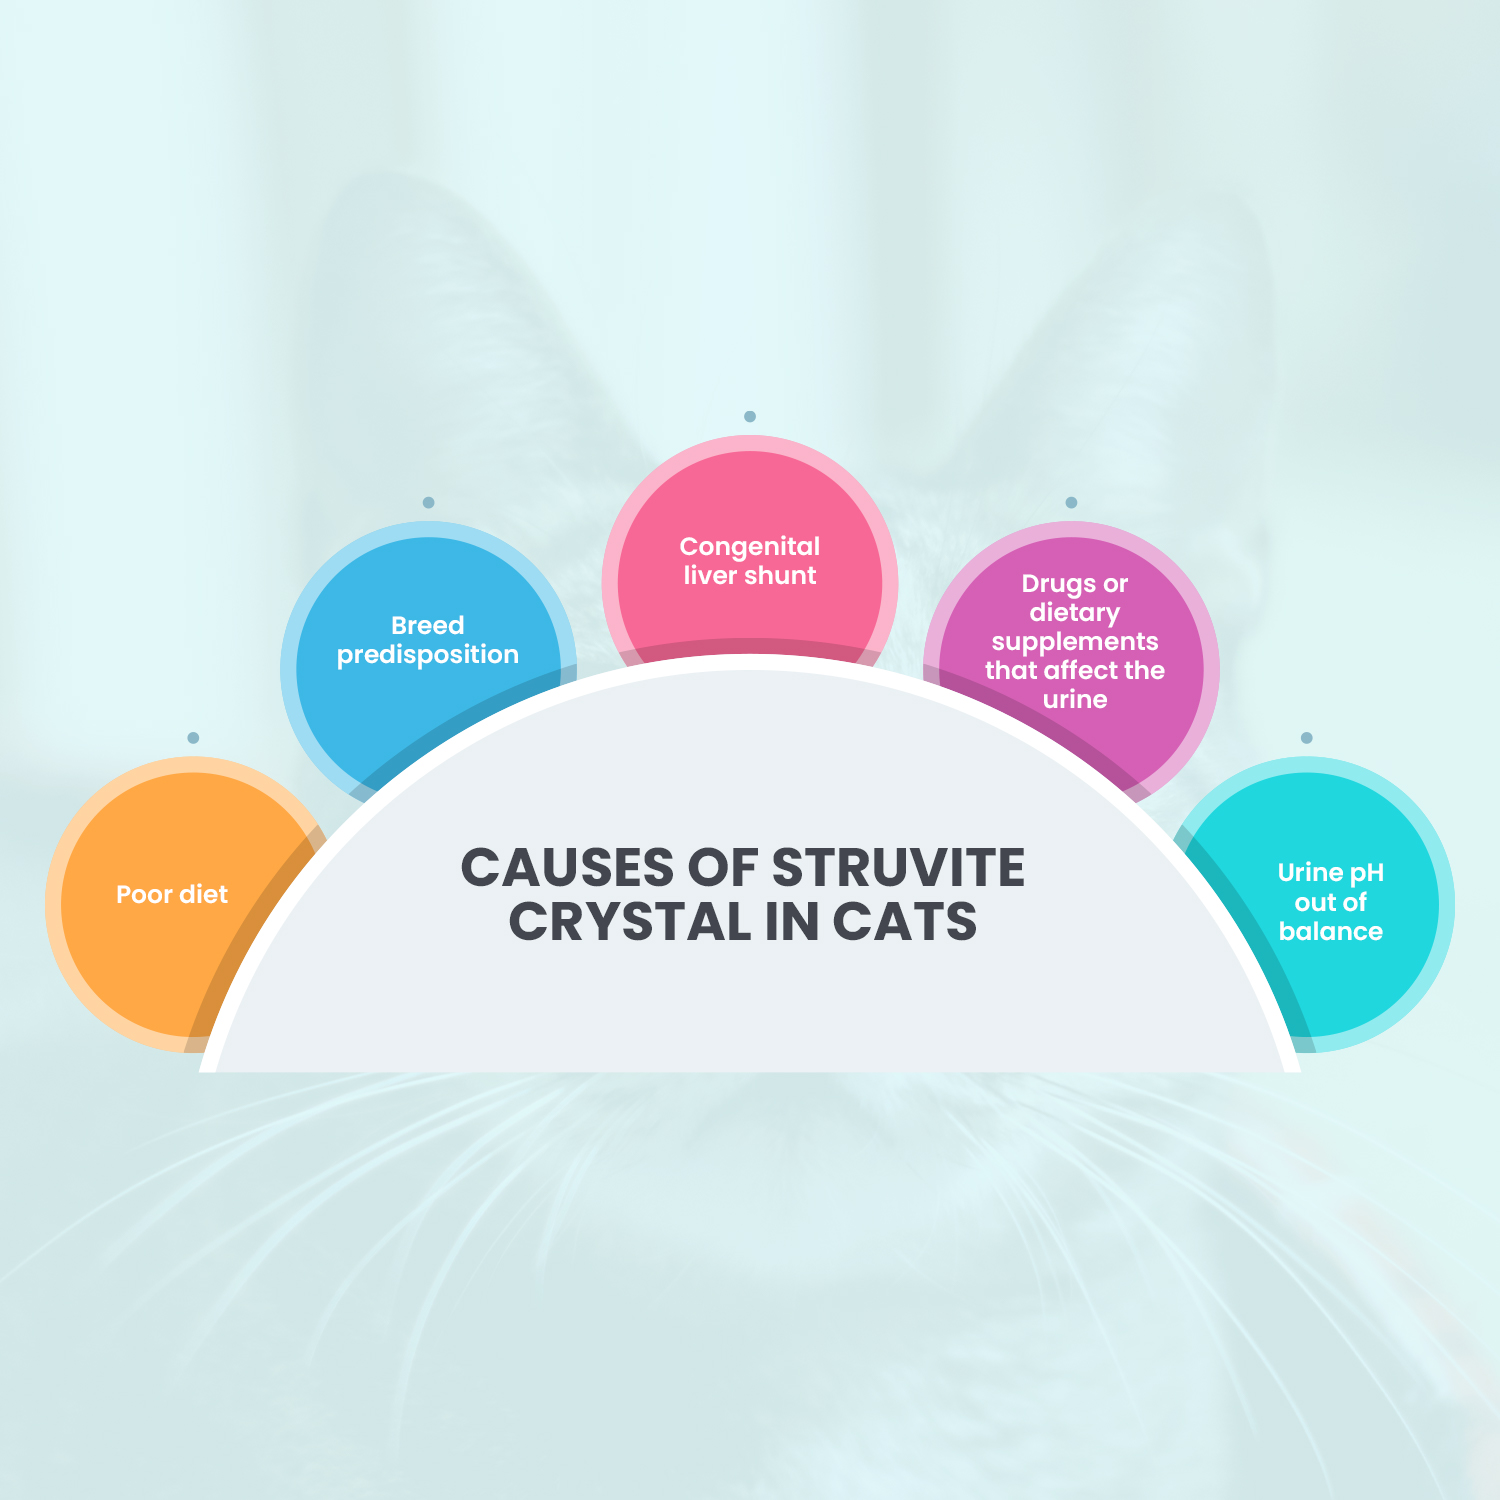 Causes of Struvite Crystal in Cats